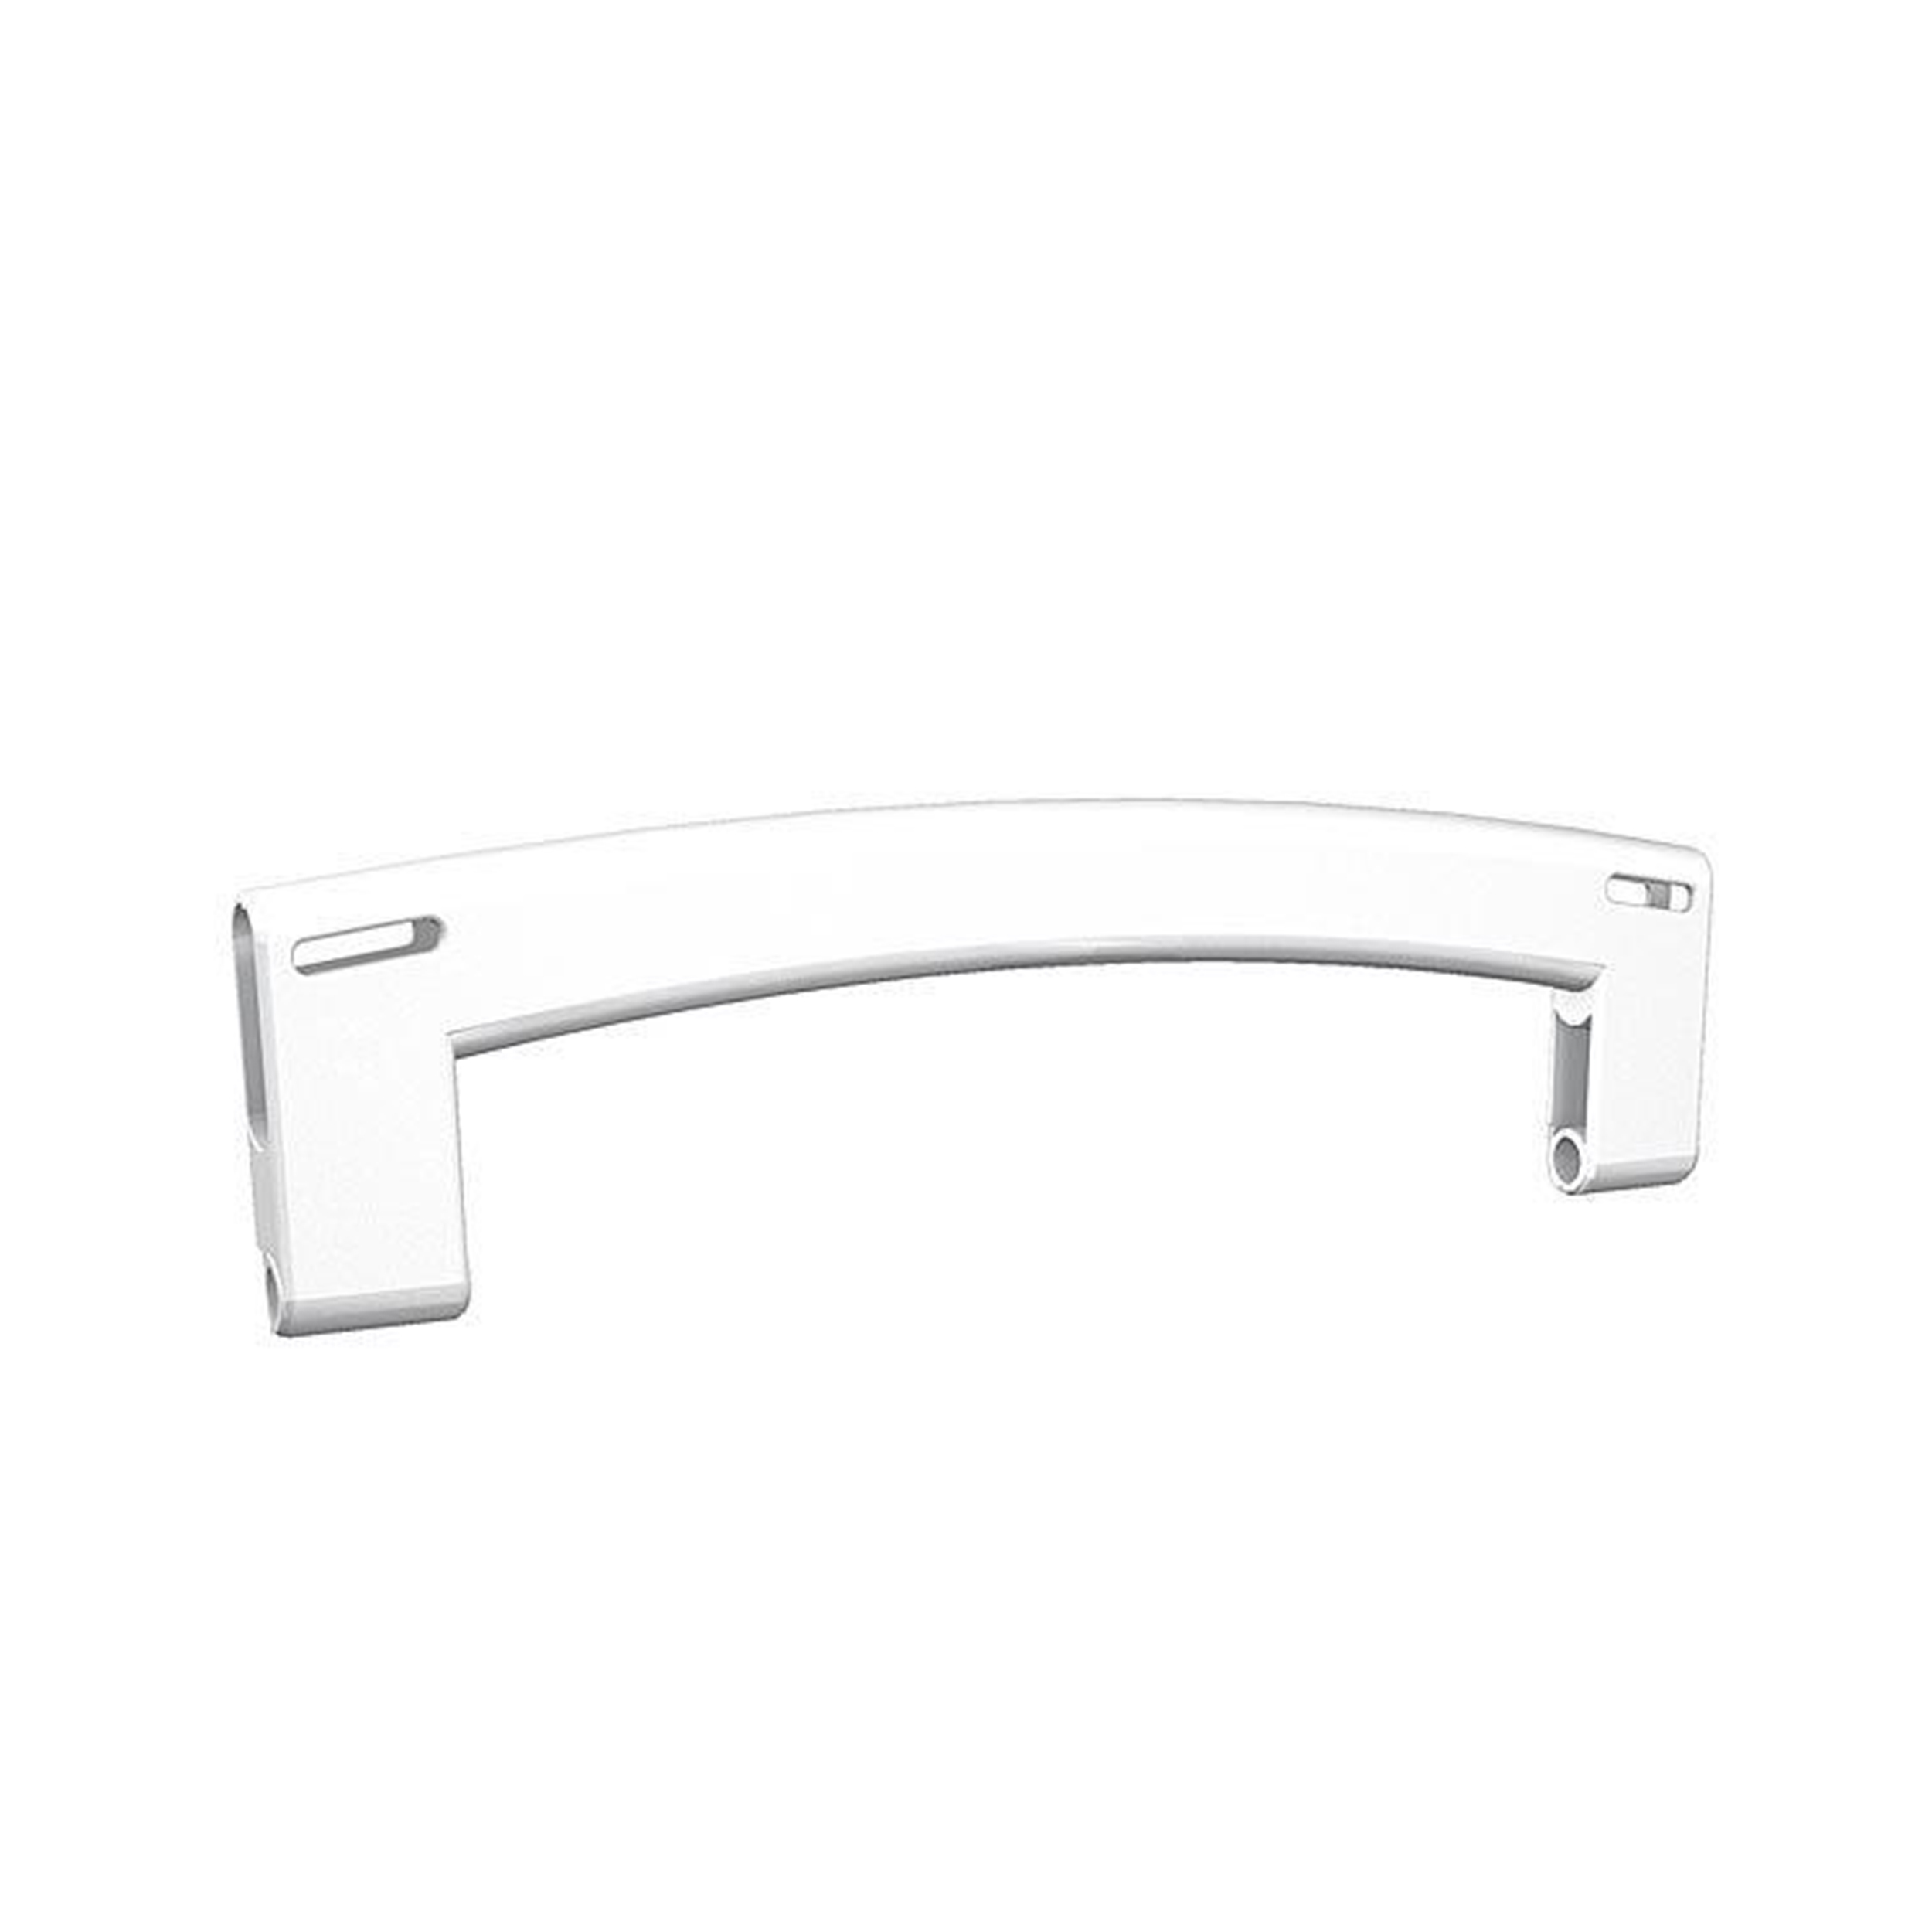 Handle For Systainer T-loc White